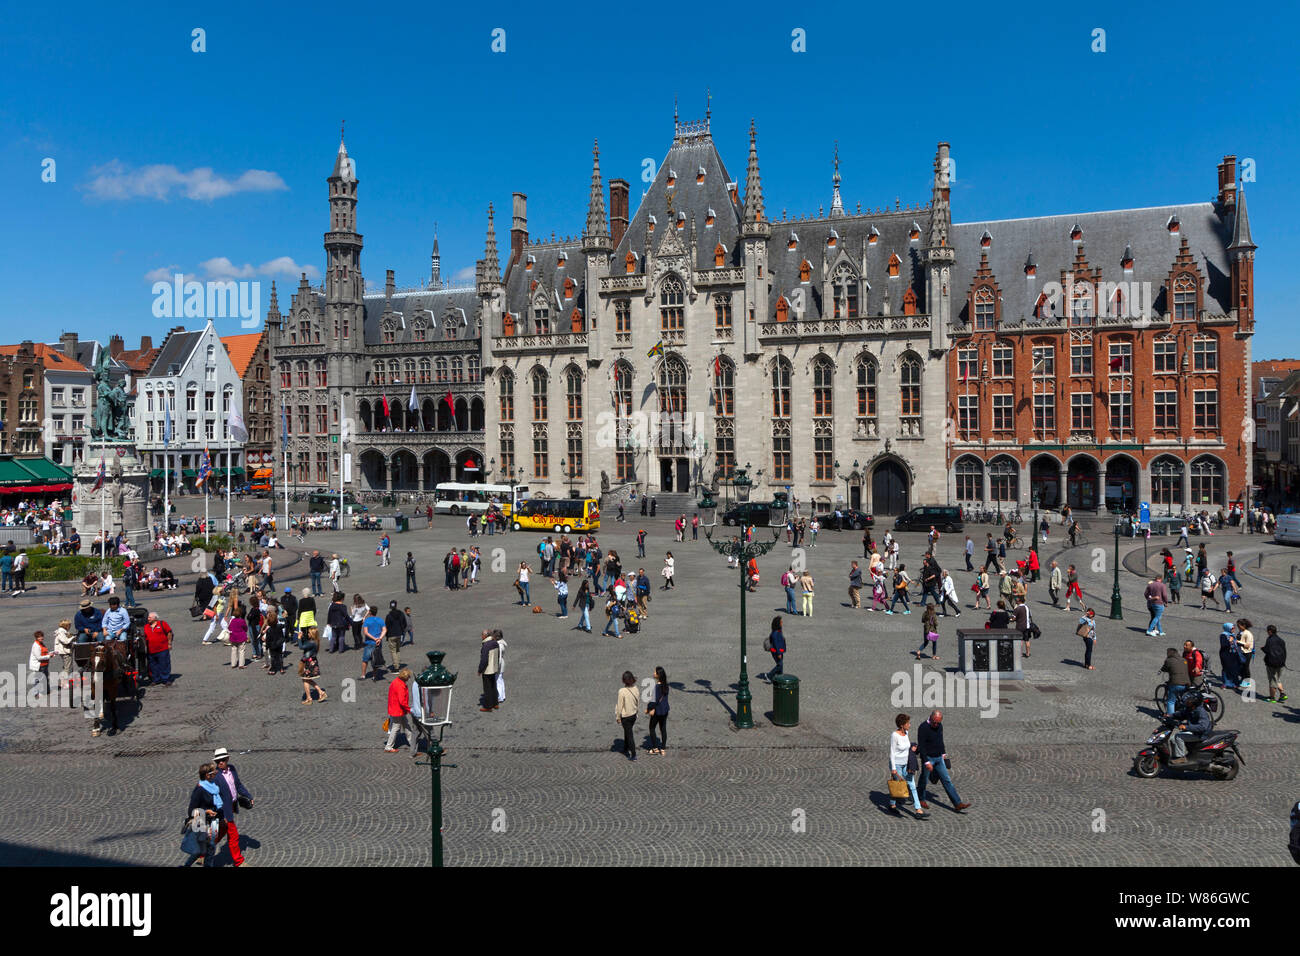 Belgium, Bruges: elaborate facade of the Provincial Palace in neo-Gothic style in the main square Markt ('Market Square'). The historical centre of Br Stock Photo